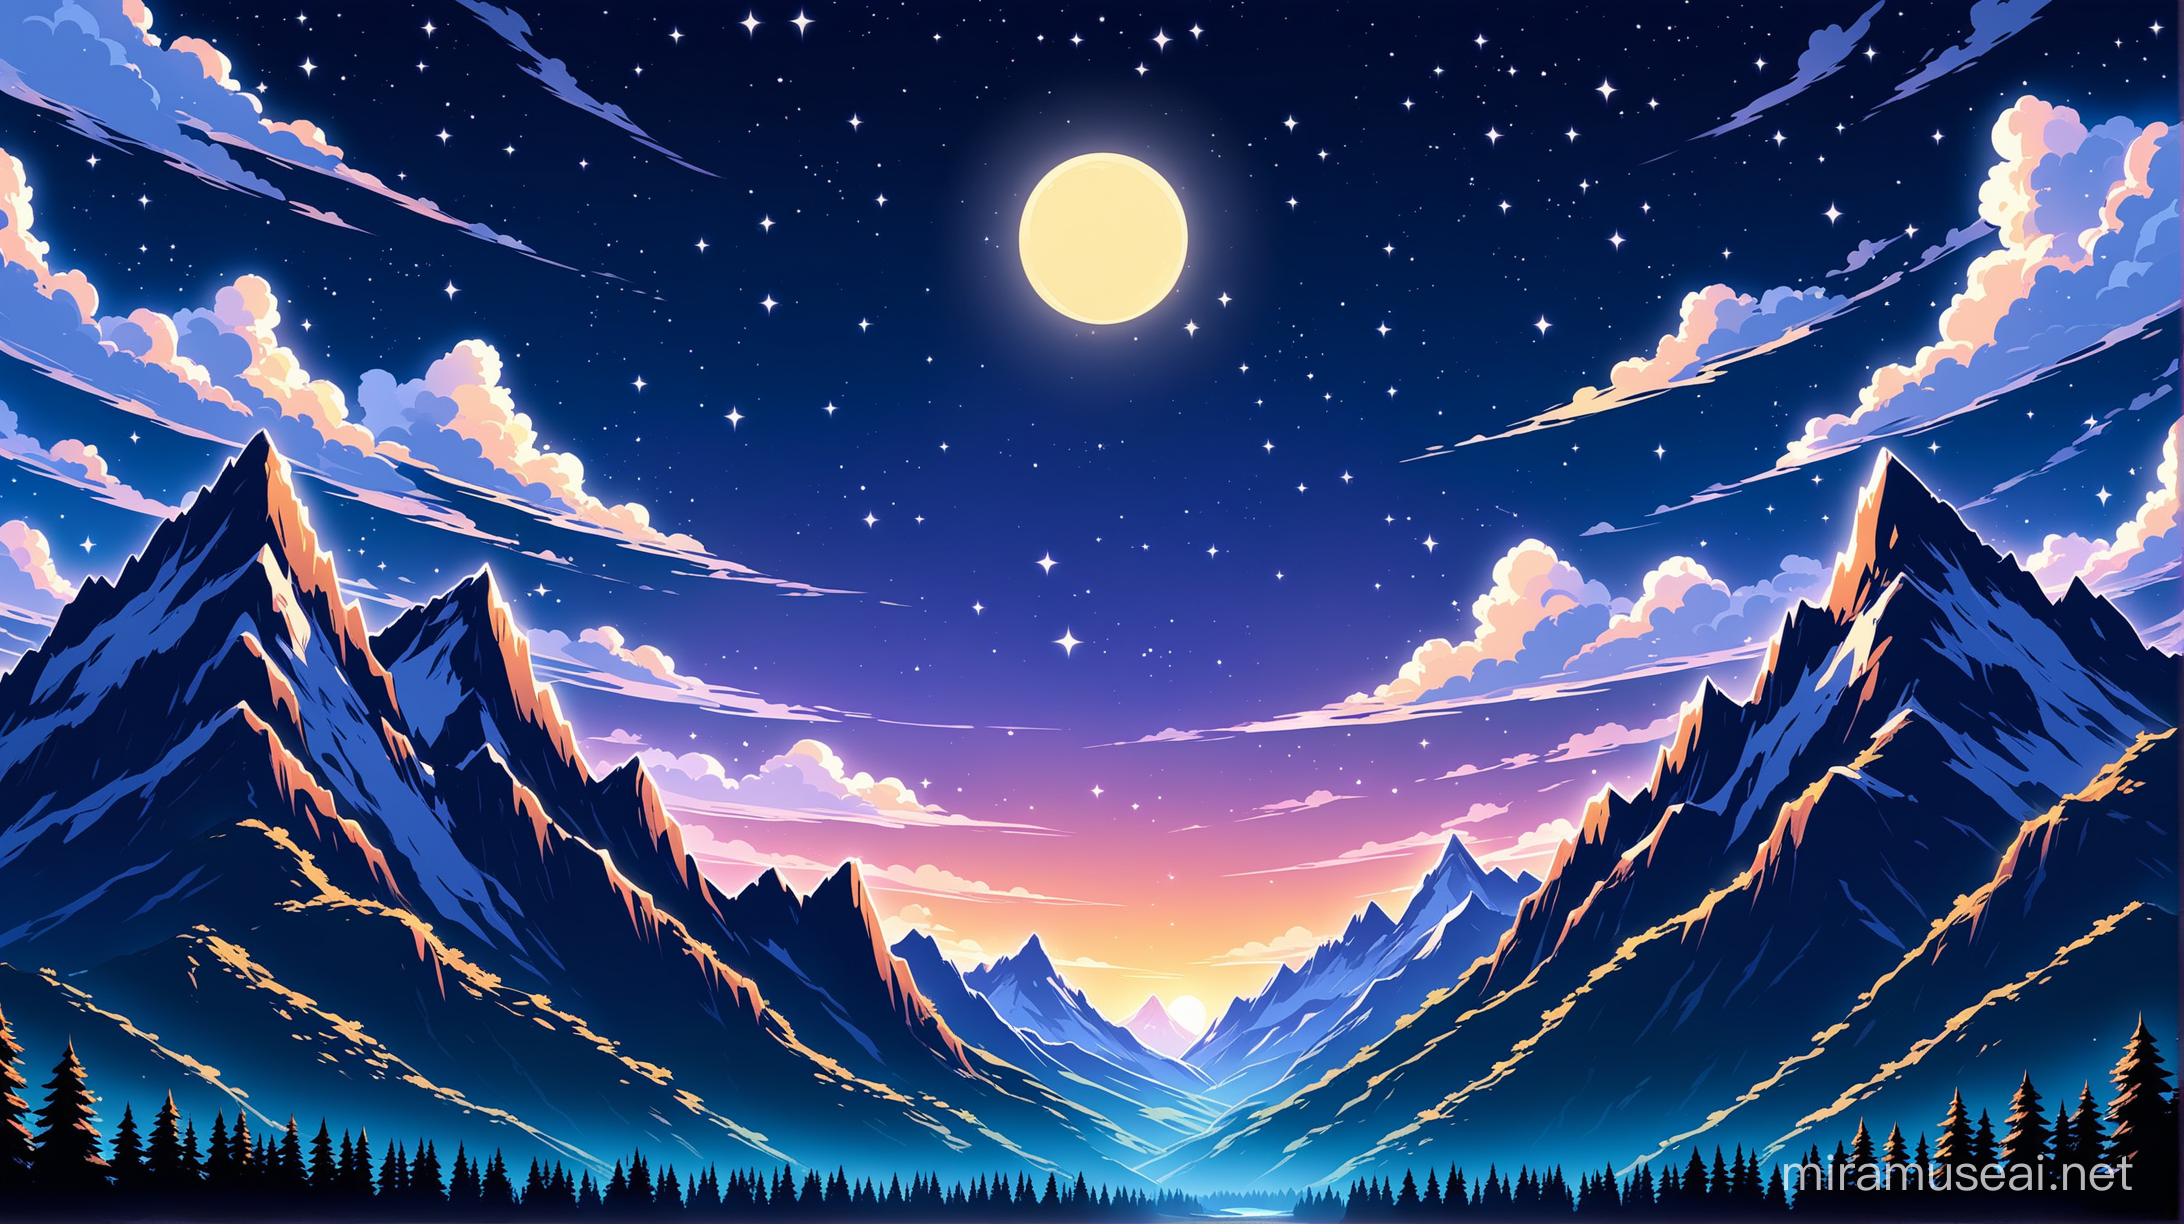 Cartoon Night Mountains Landscape with Glowing Moon